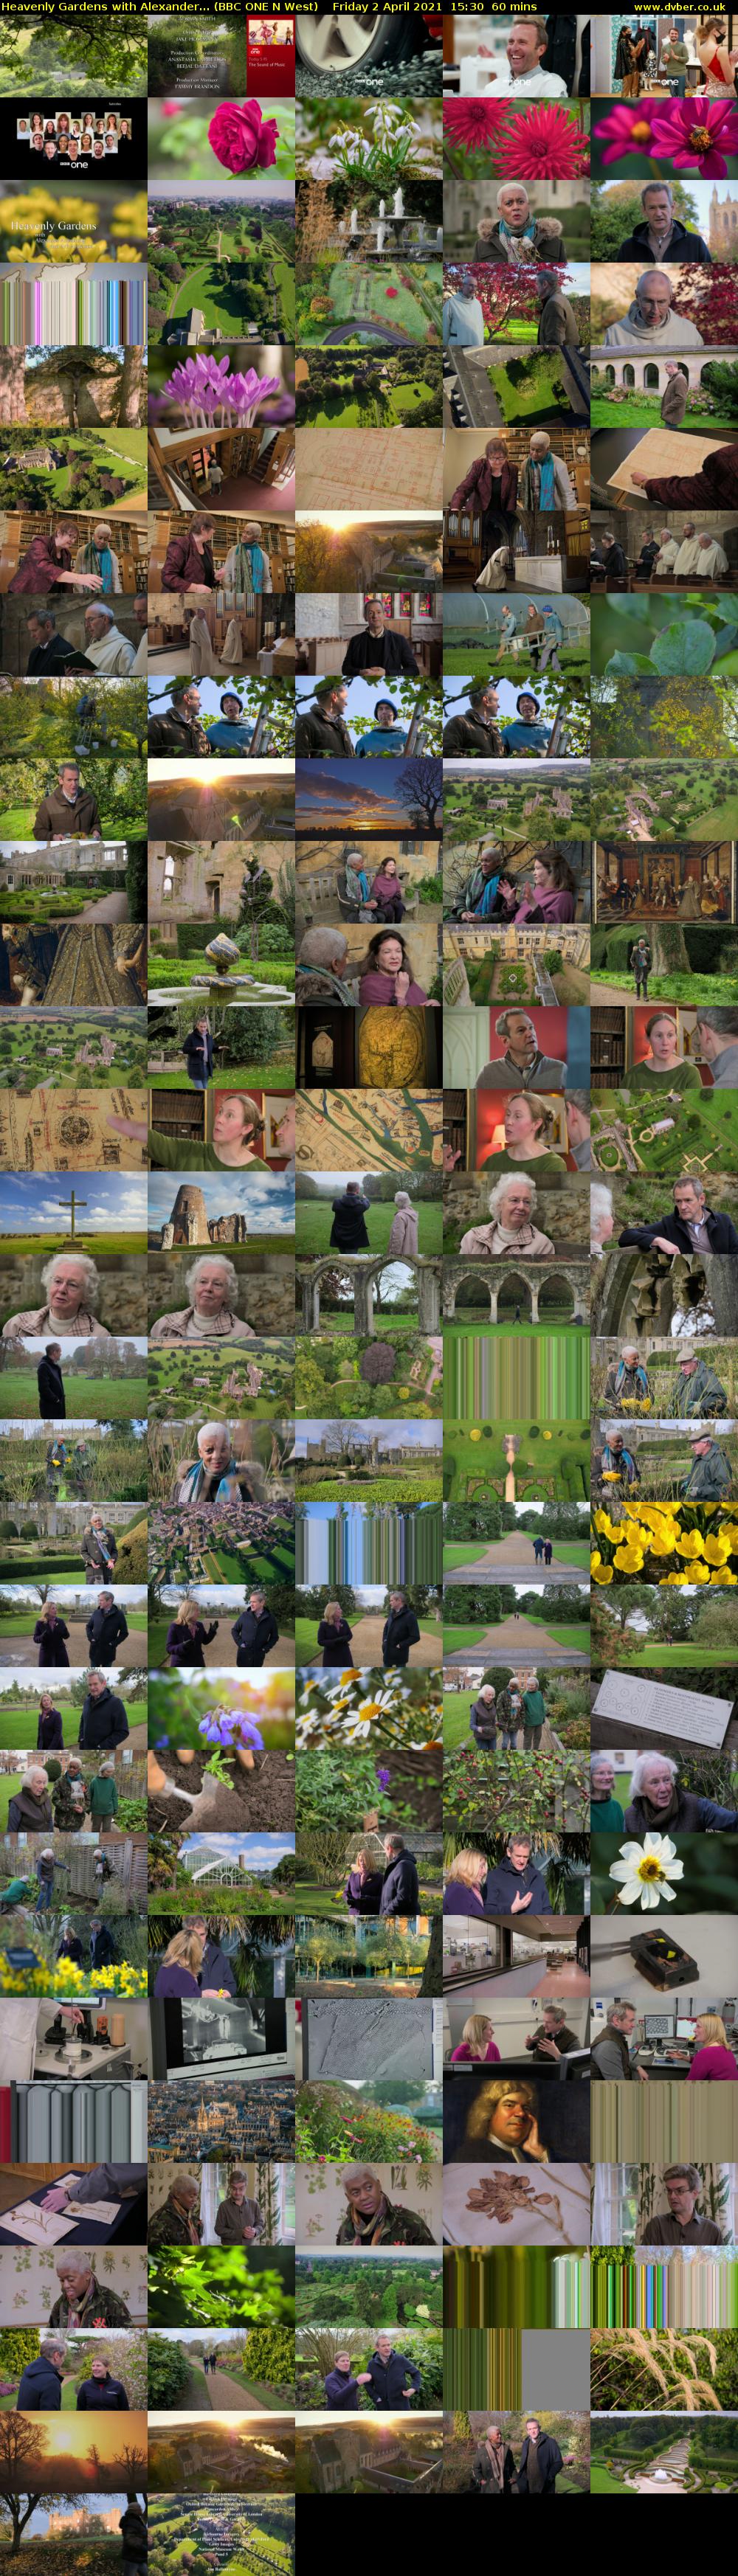 Heavenly Gardens with Alexander... (BBC ONE N West) Friday 2 April 2021 15:30 - 16:30